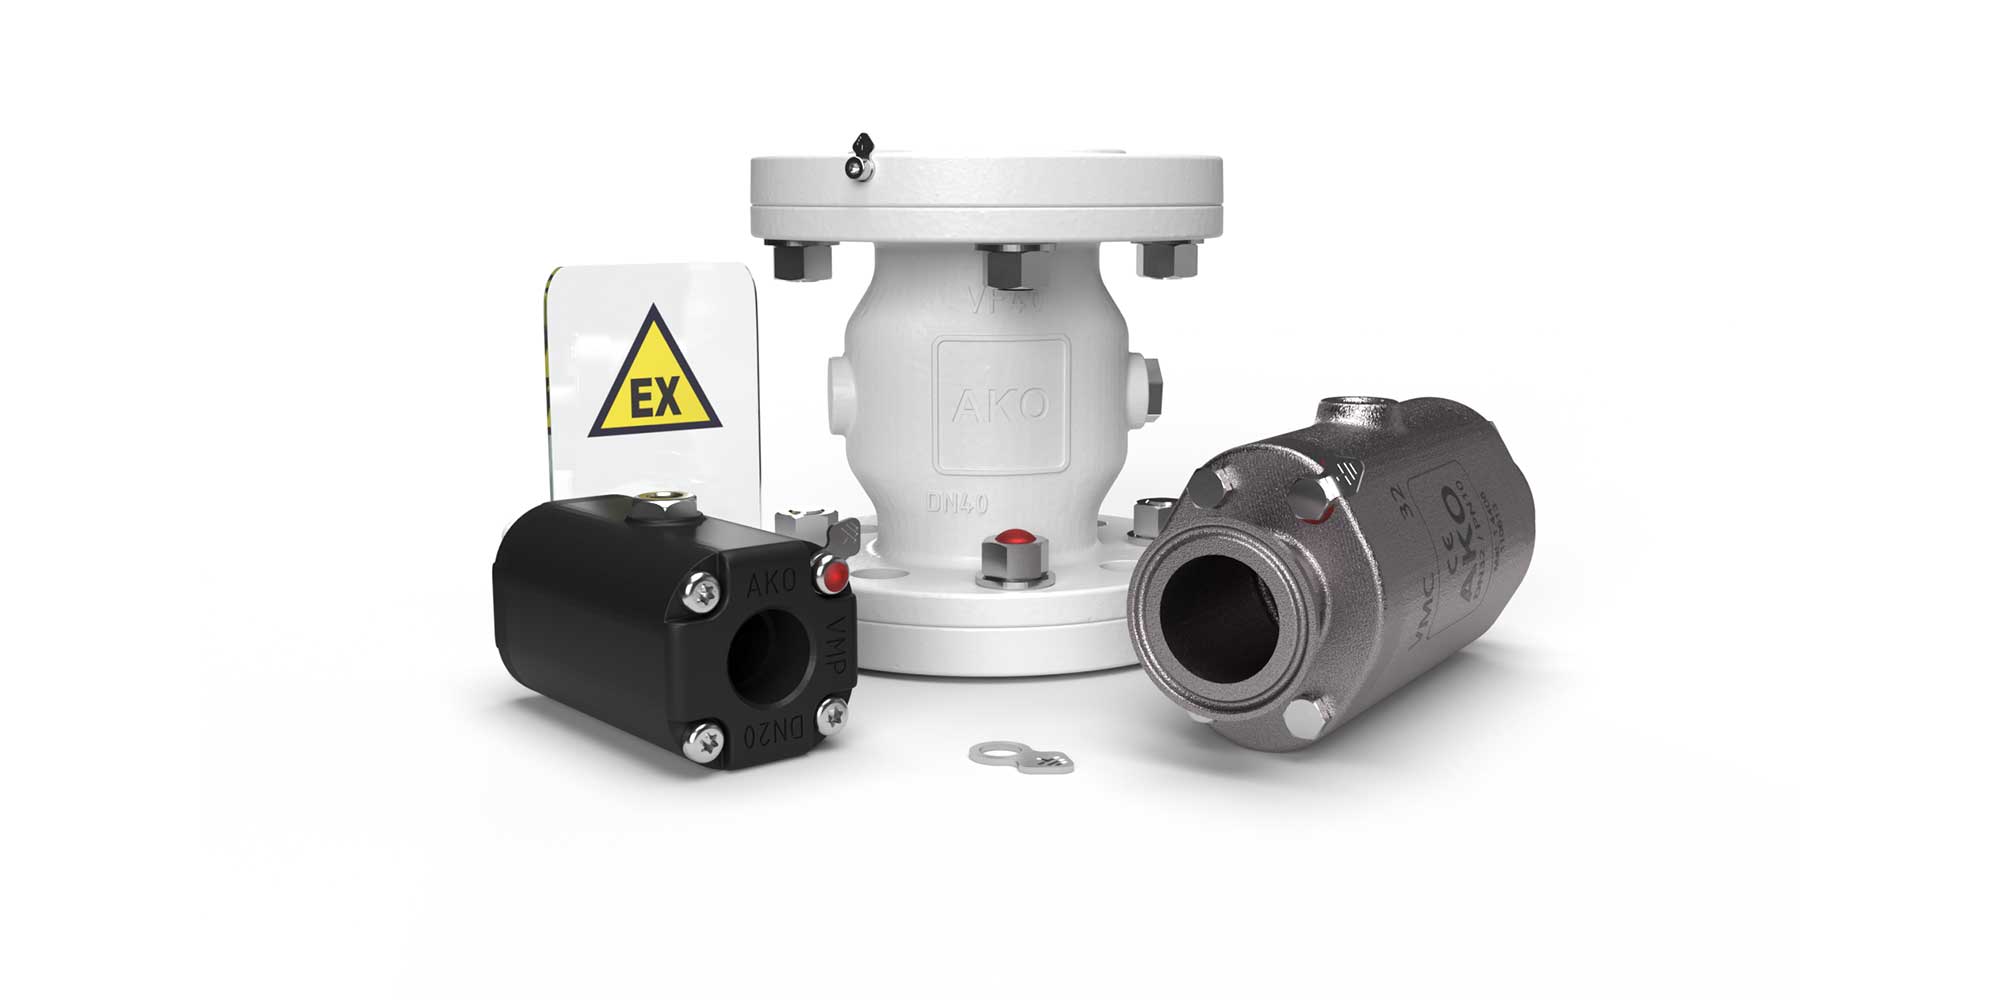 Air operated pinch valves from AKO in Ex / ATEX designs